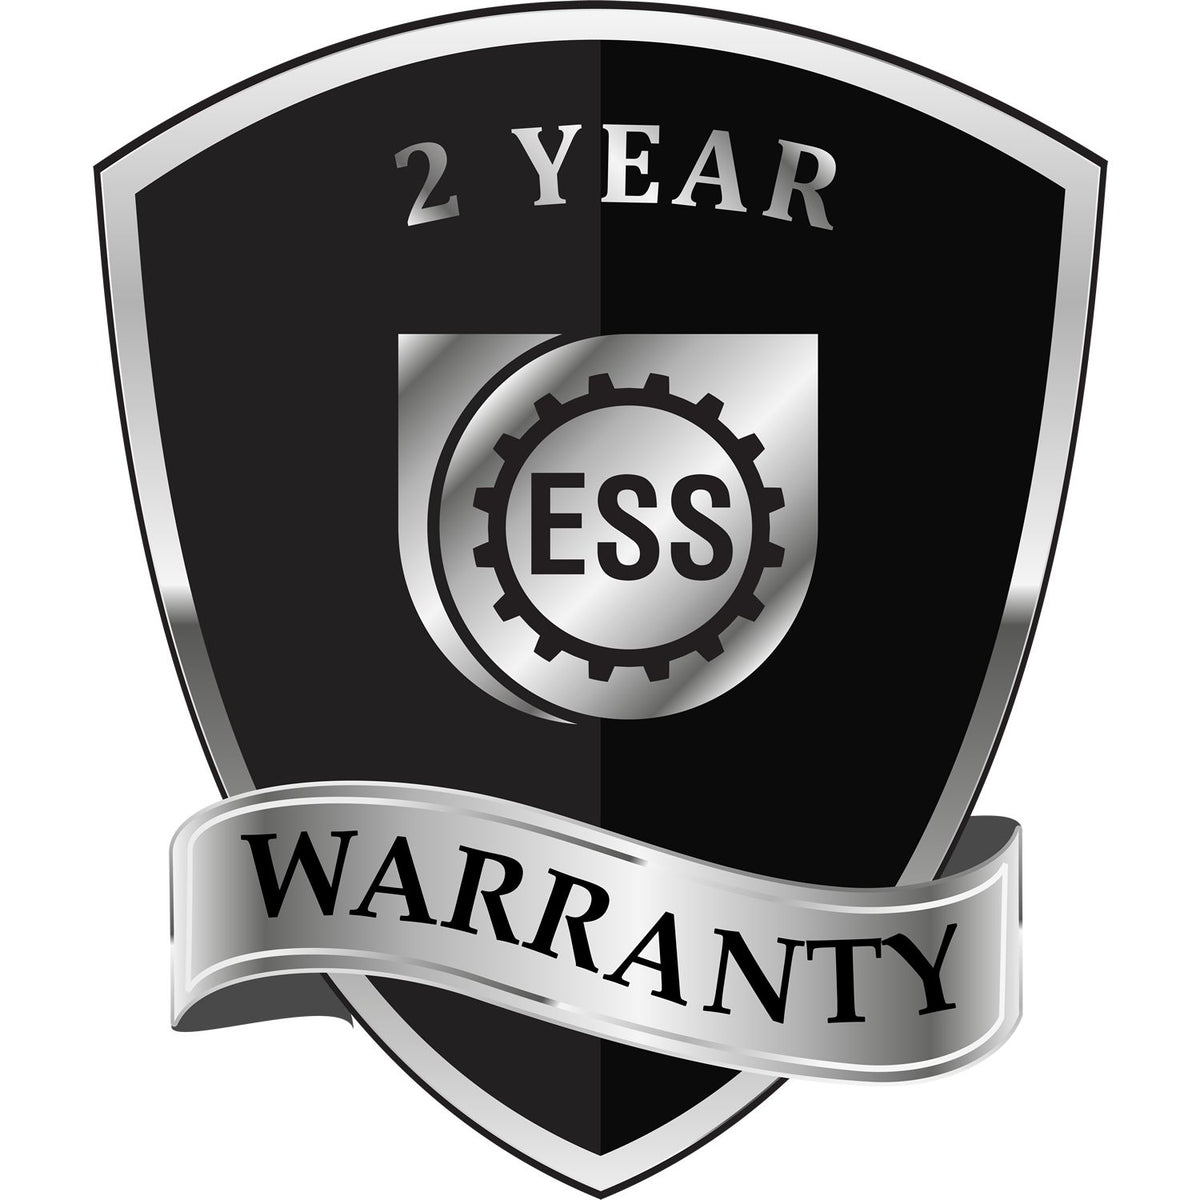 A badge or emblem showing a warranty icon for the Extended Long Reach Mississippi Surveyor Embosser